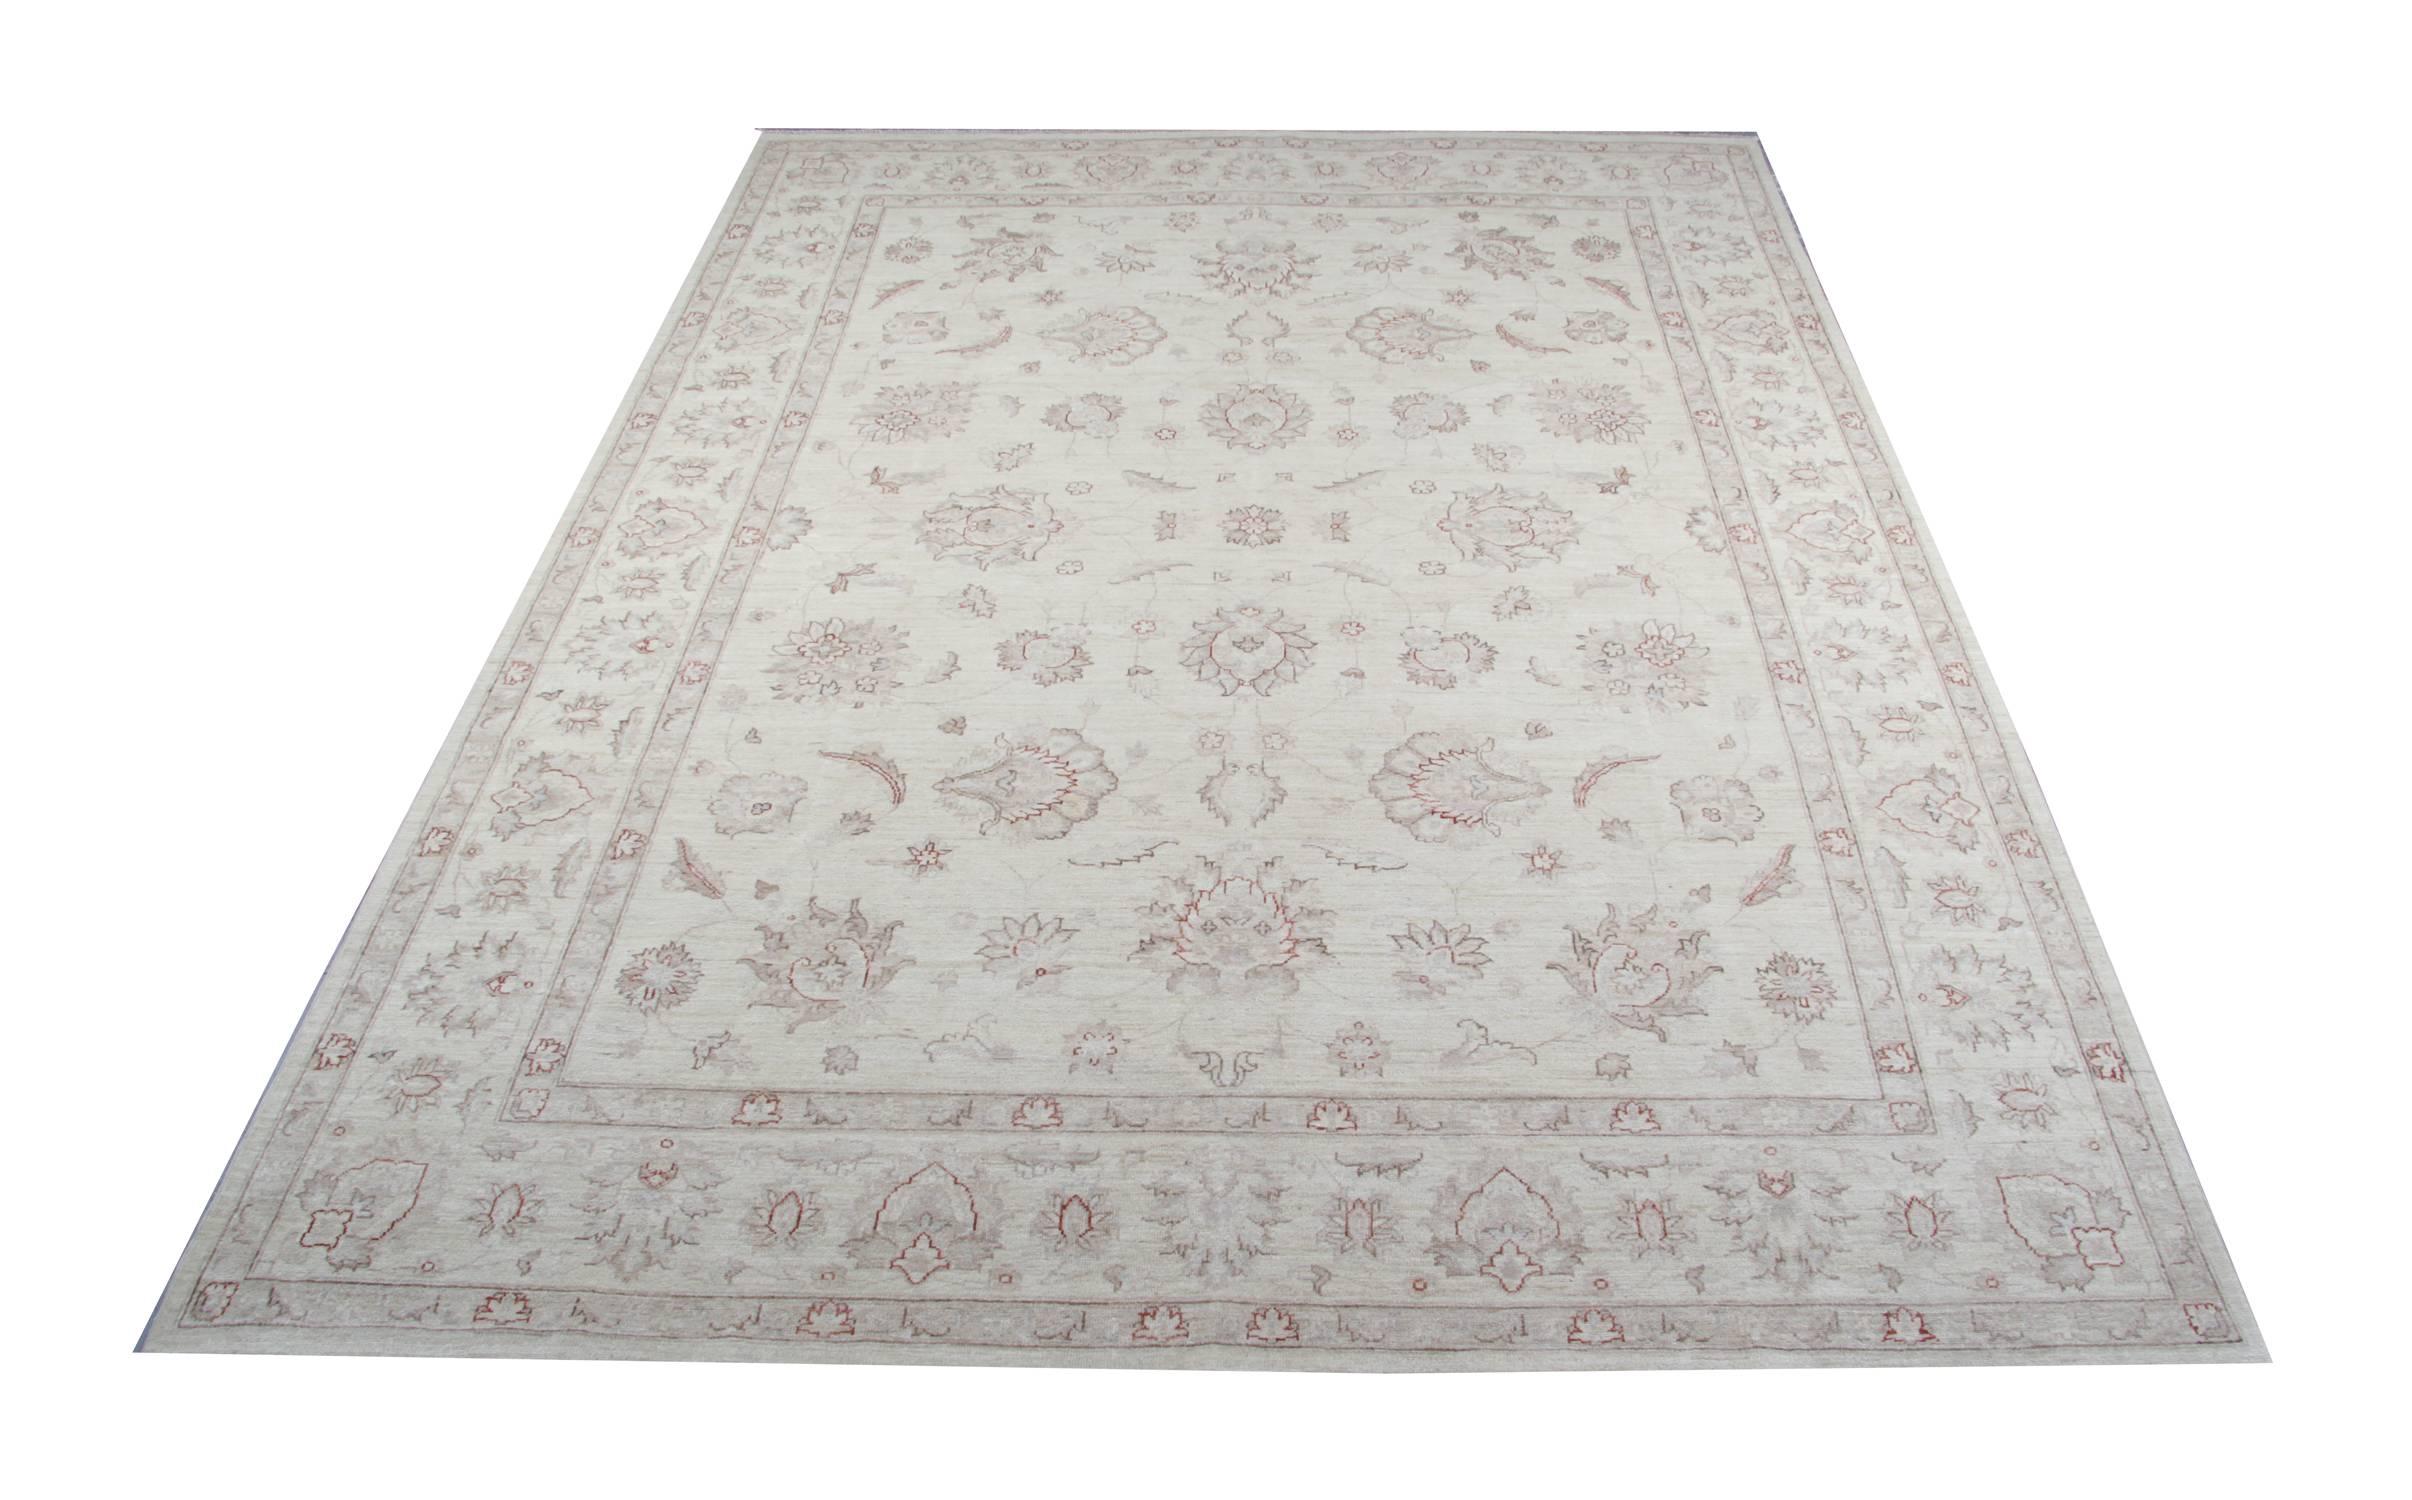 This is traditional rugs kind of our luxury rugs made of own looms by our master weavers of Afghan rugs, This cream rug is made with organic vegetable dyes all handspun wool rugs. This carpet rug is a kind of patterned rugs all-over floral rugs